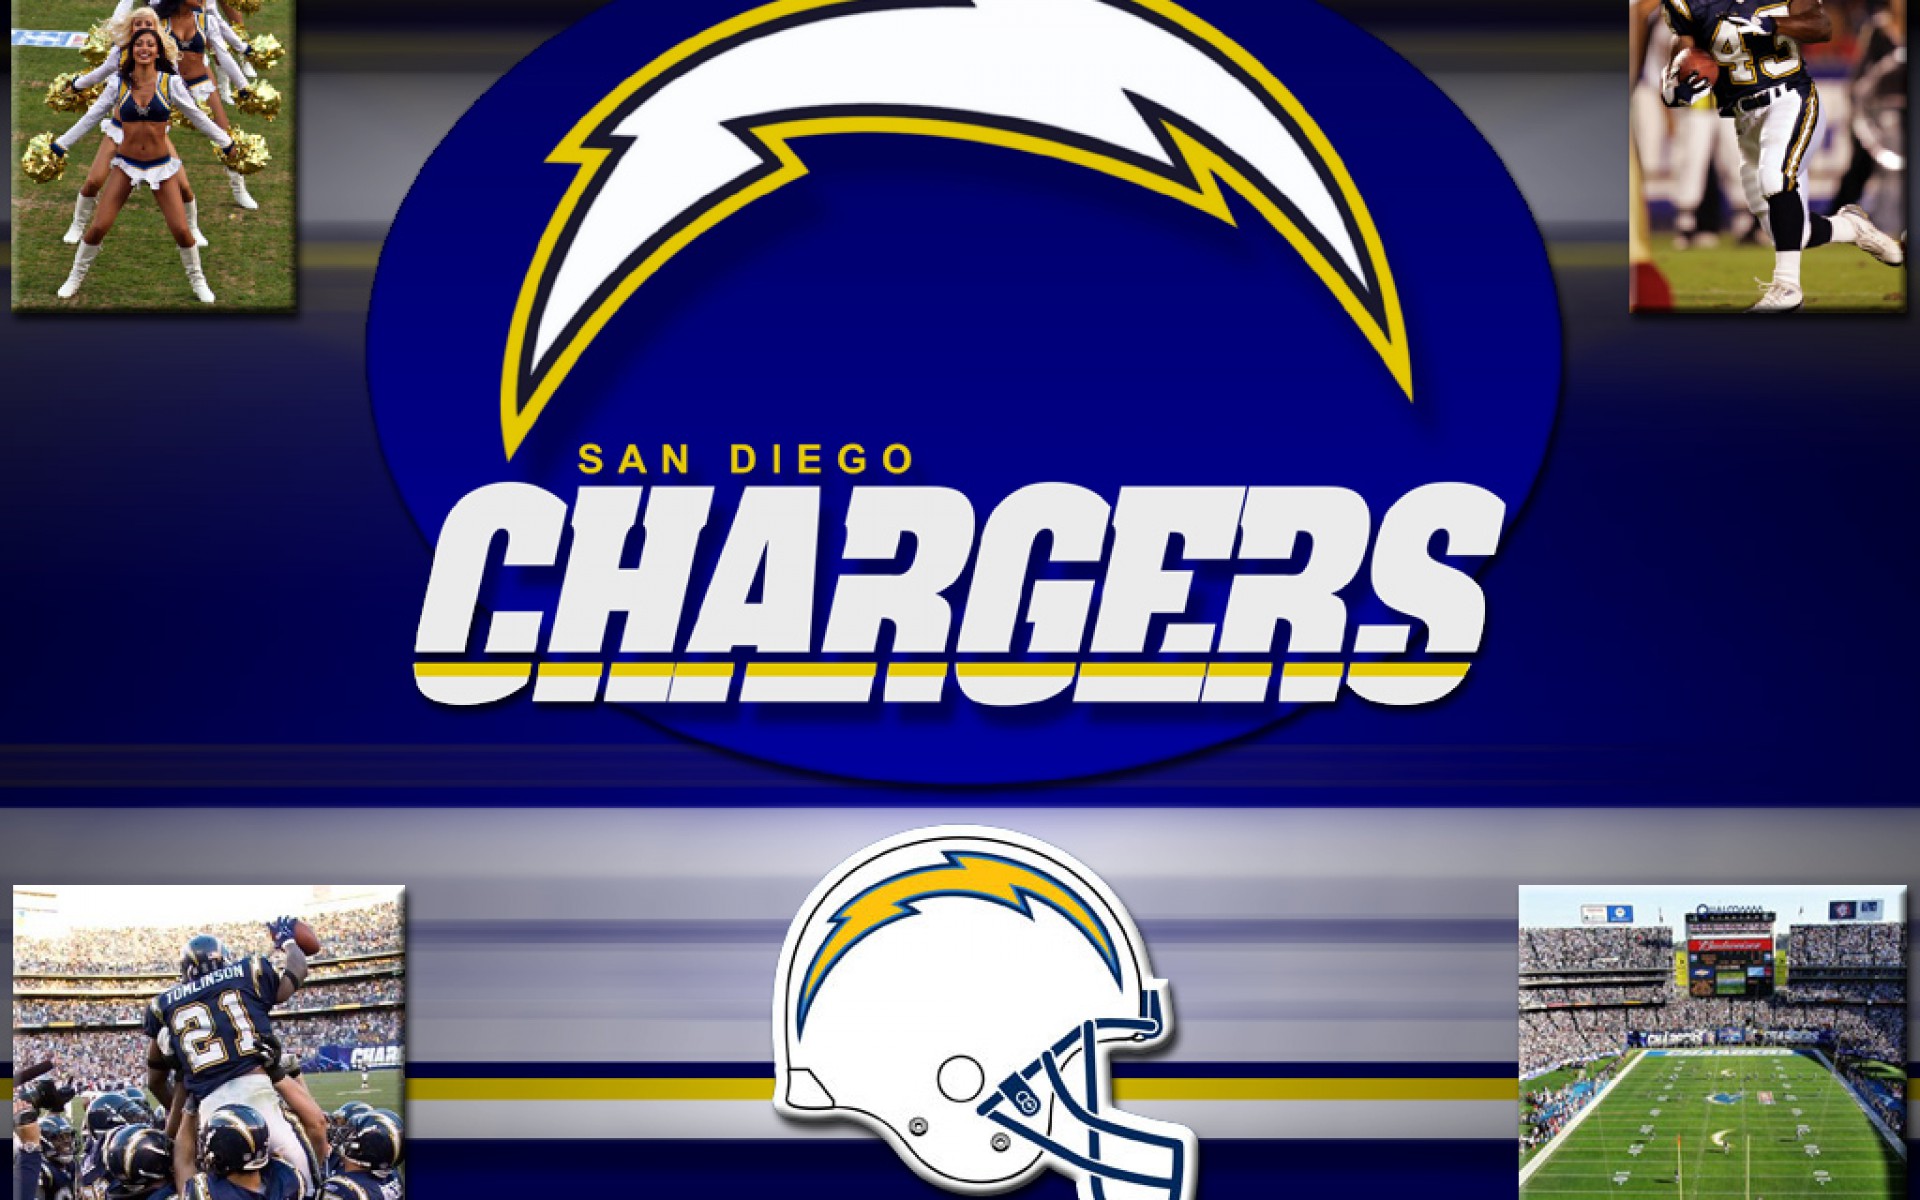 San Diego Chargers Nfl Football Nm Wallpaper - Los Angeles Chargers Merry Christmas - HD Wallpaper 